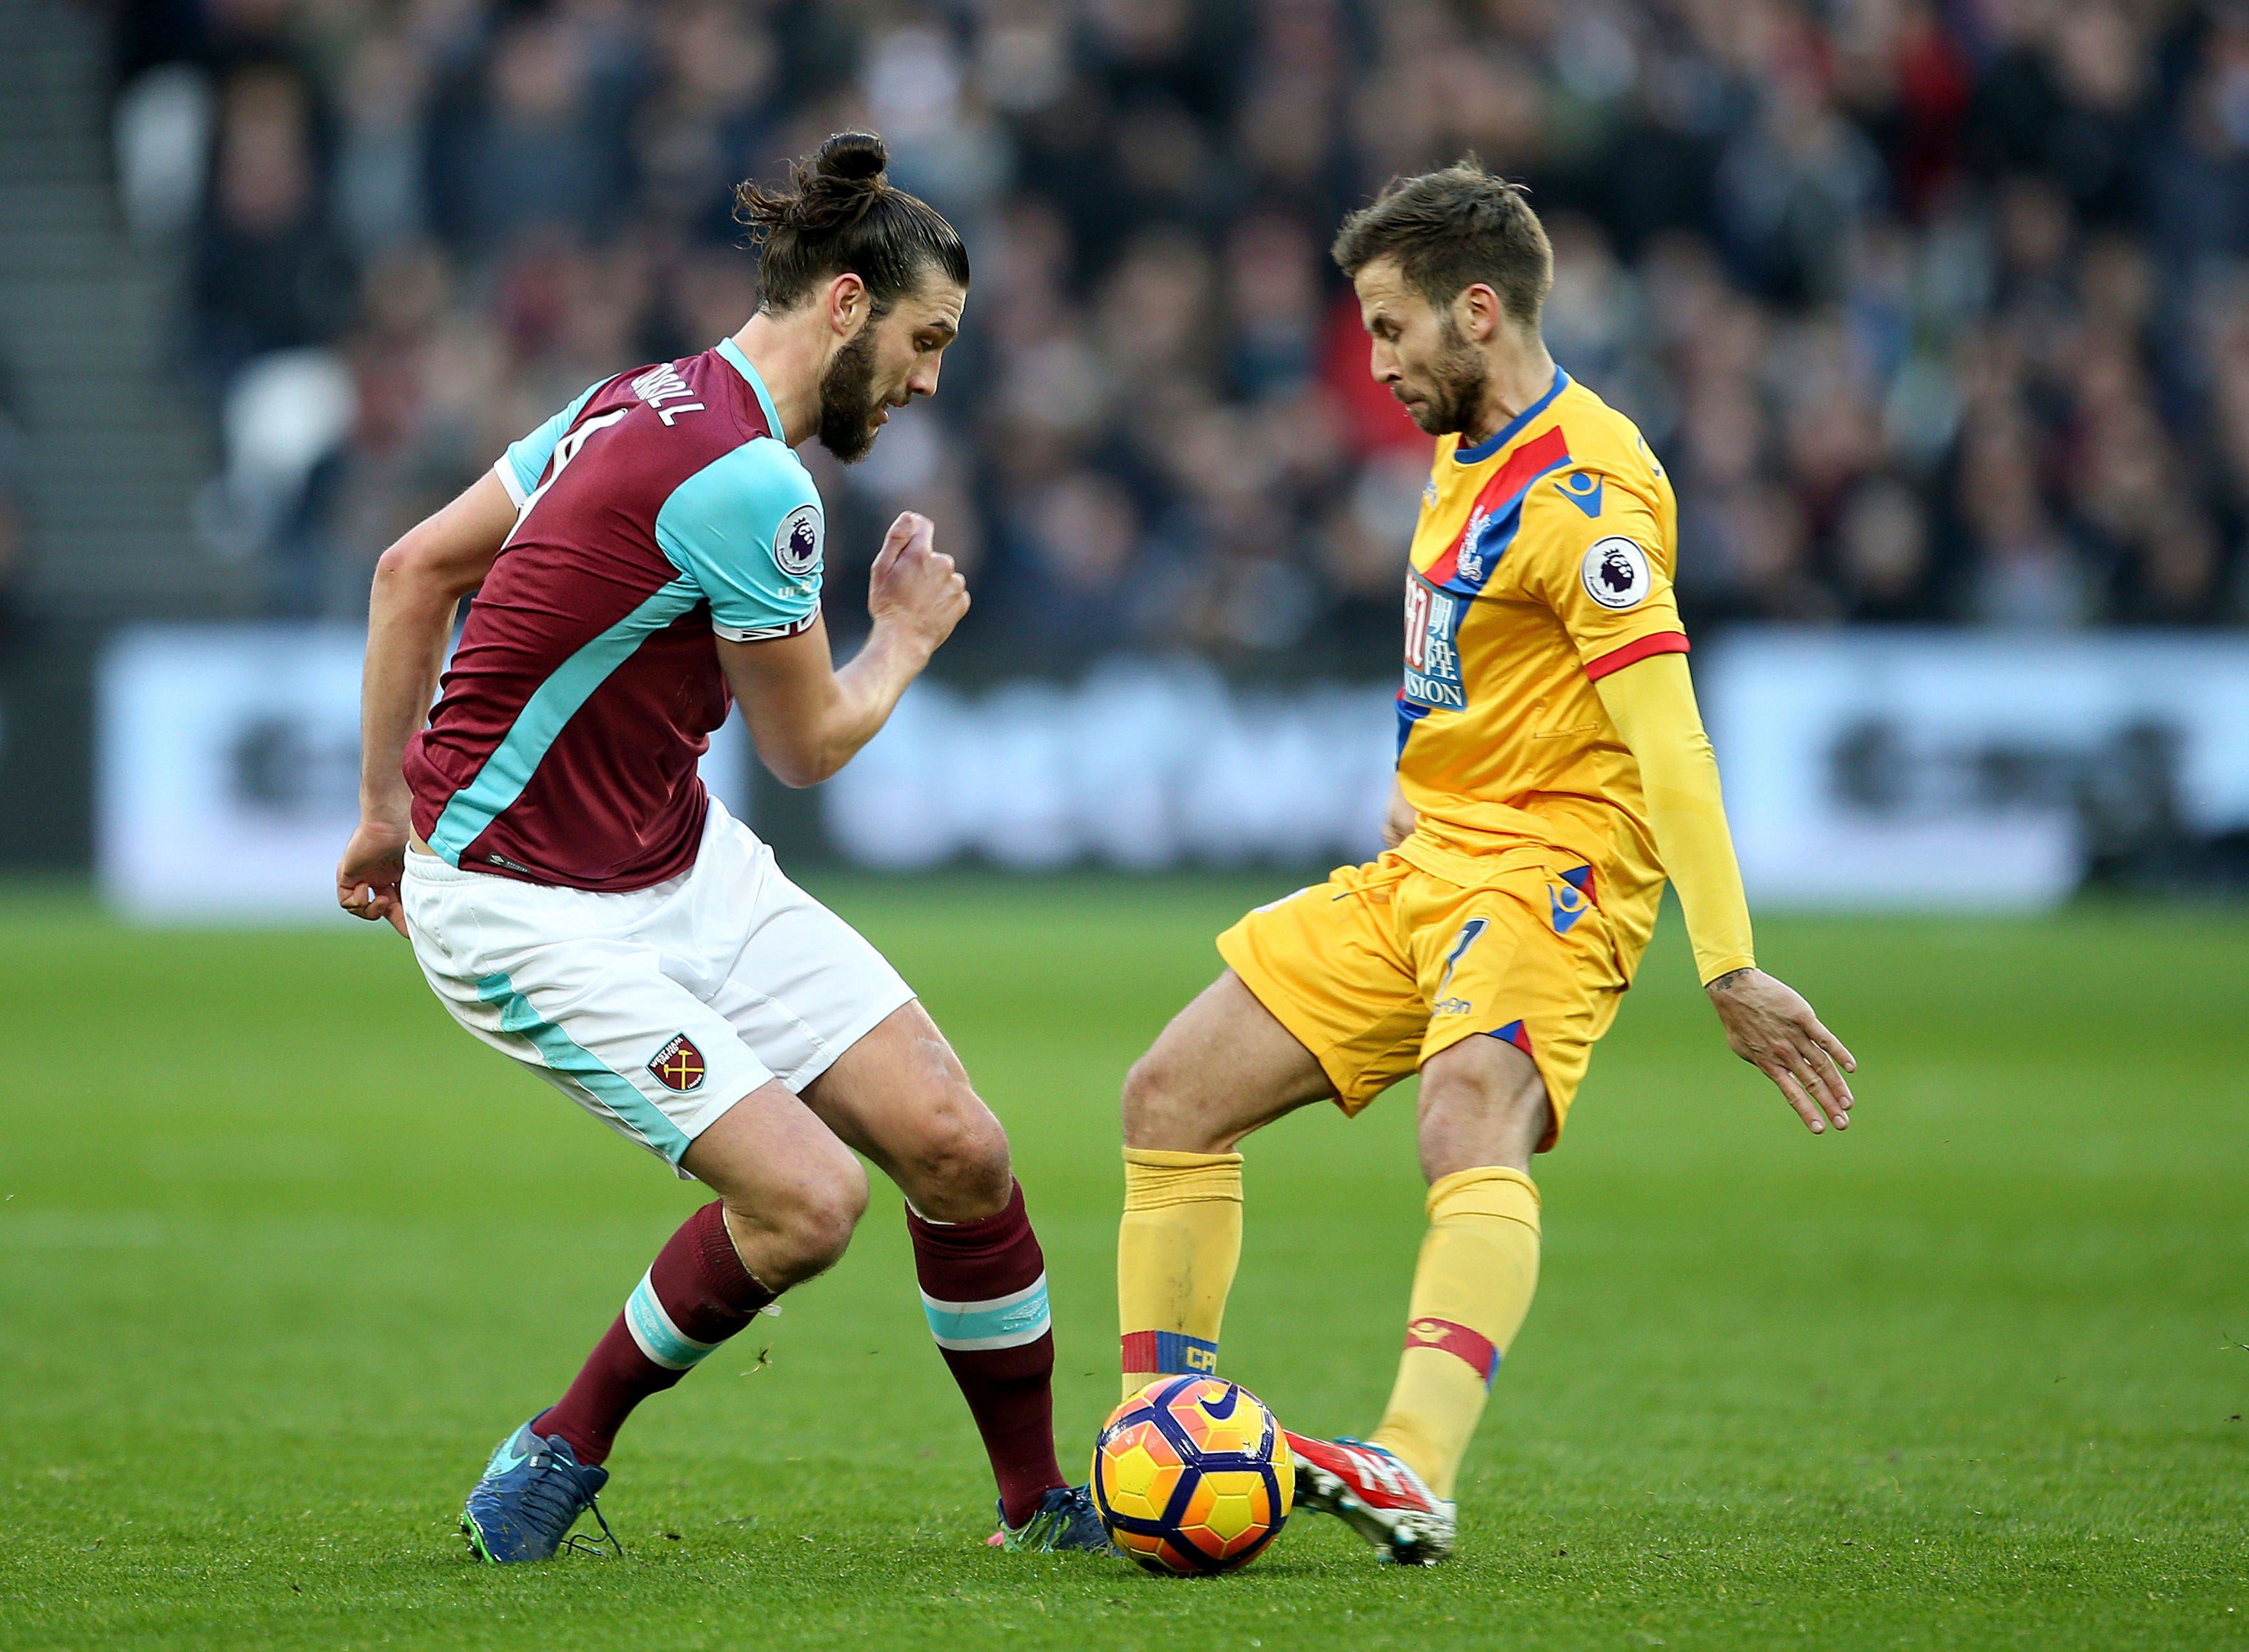 West Ham copes without Payet to beat Crystal Palace 3-0